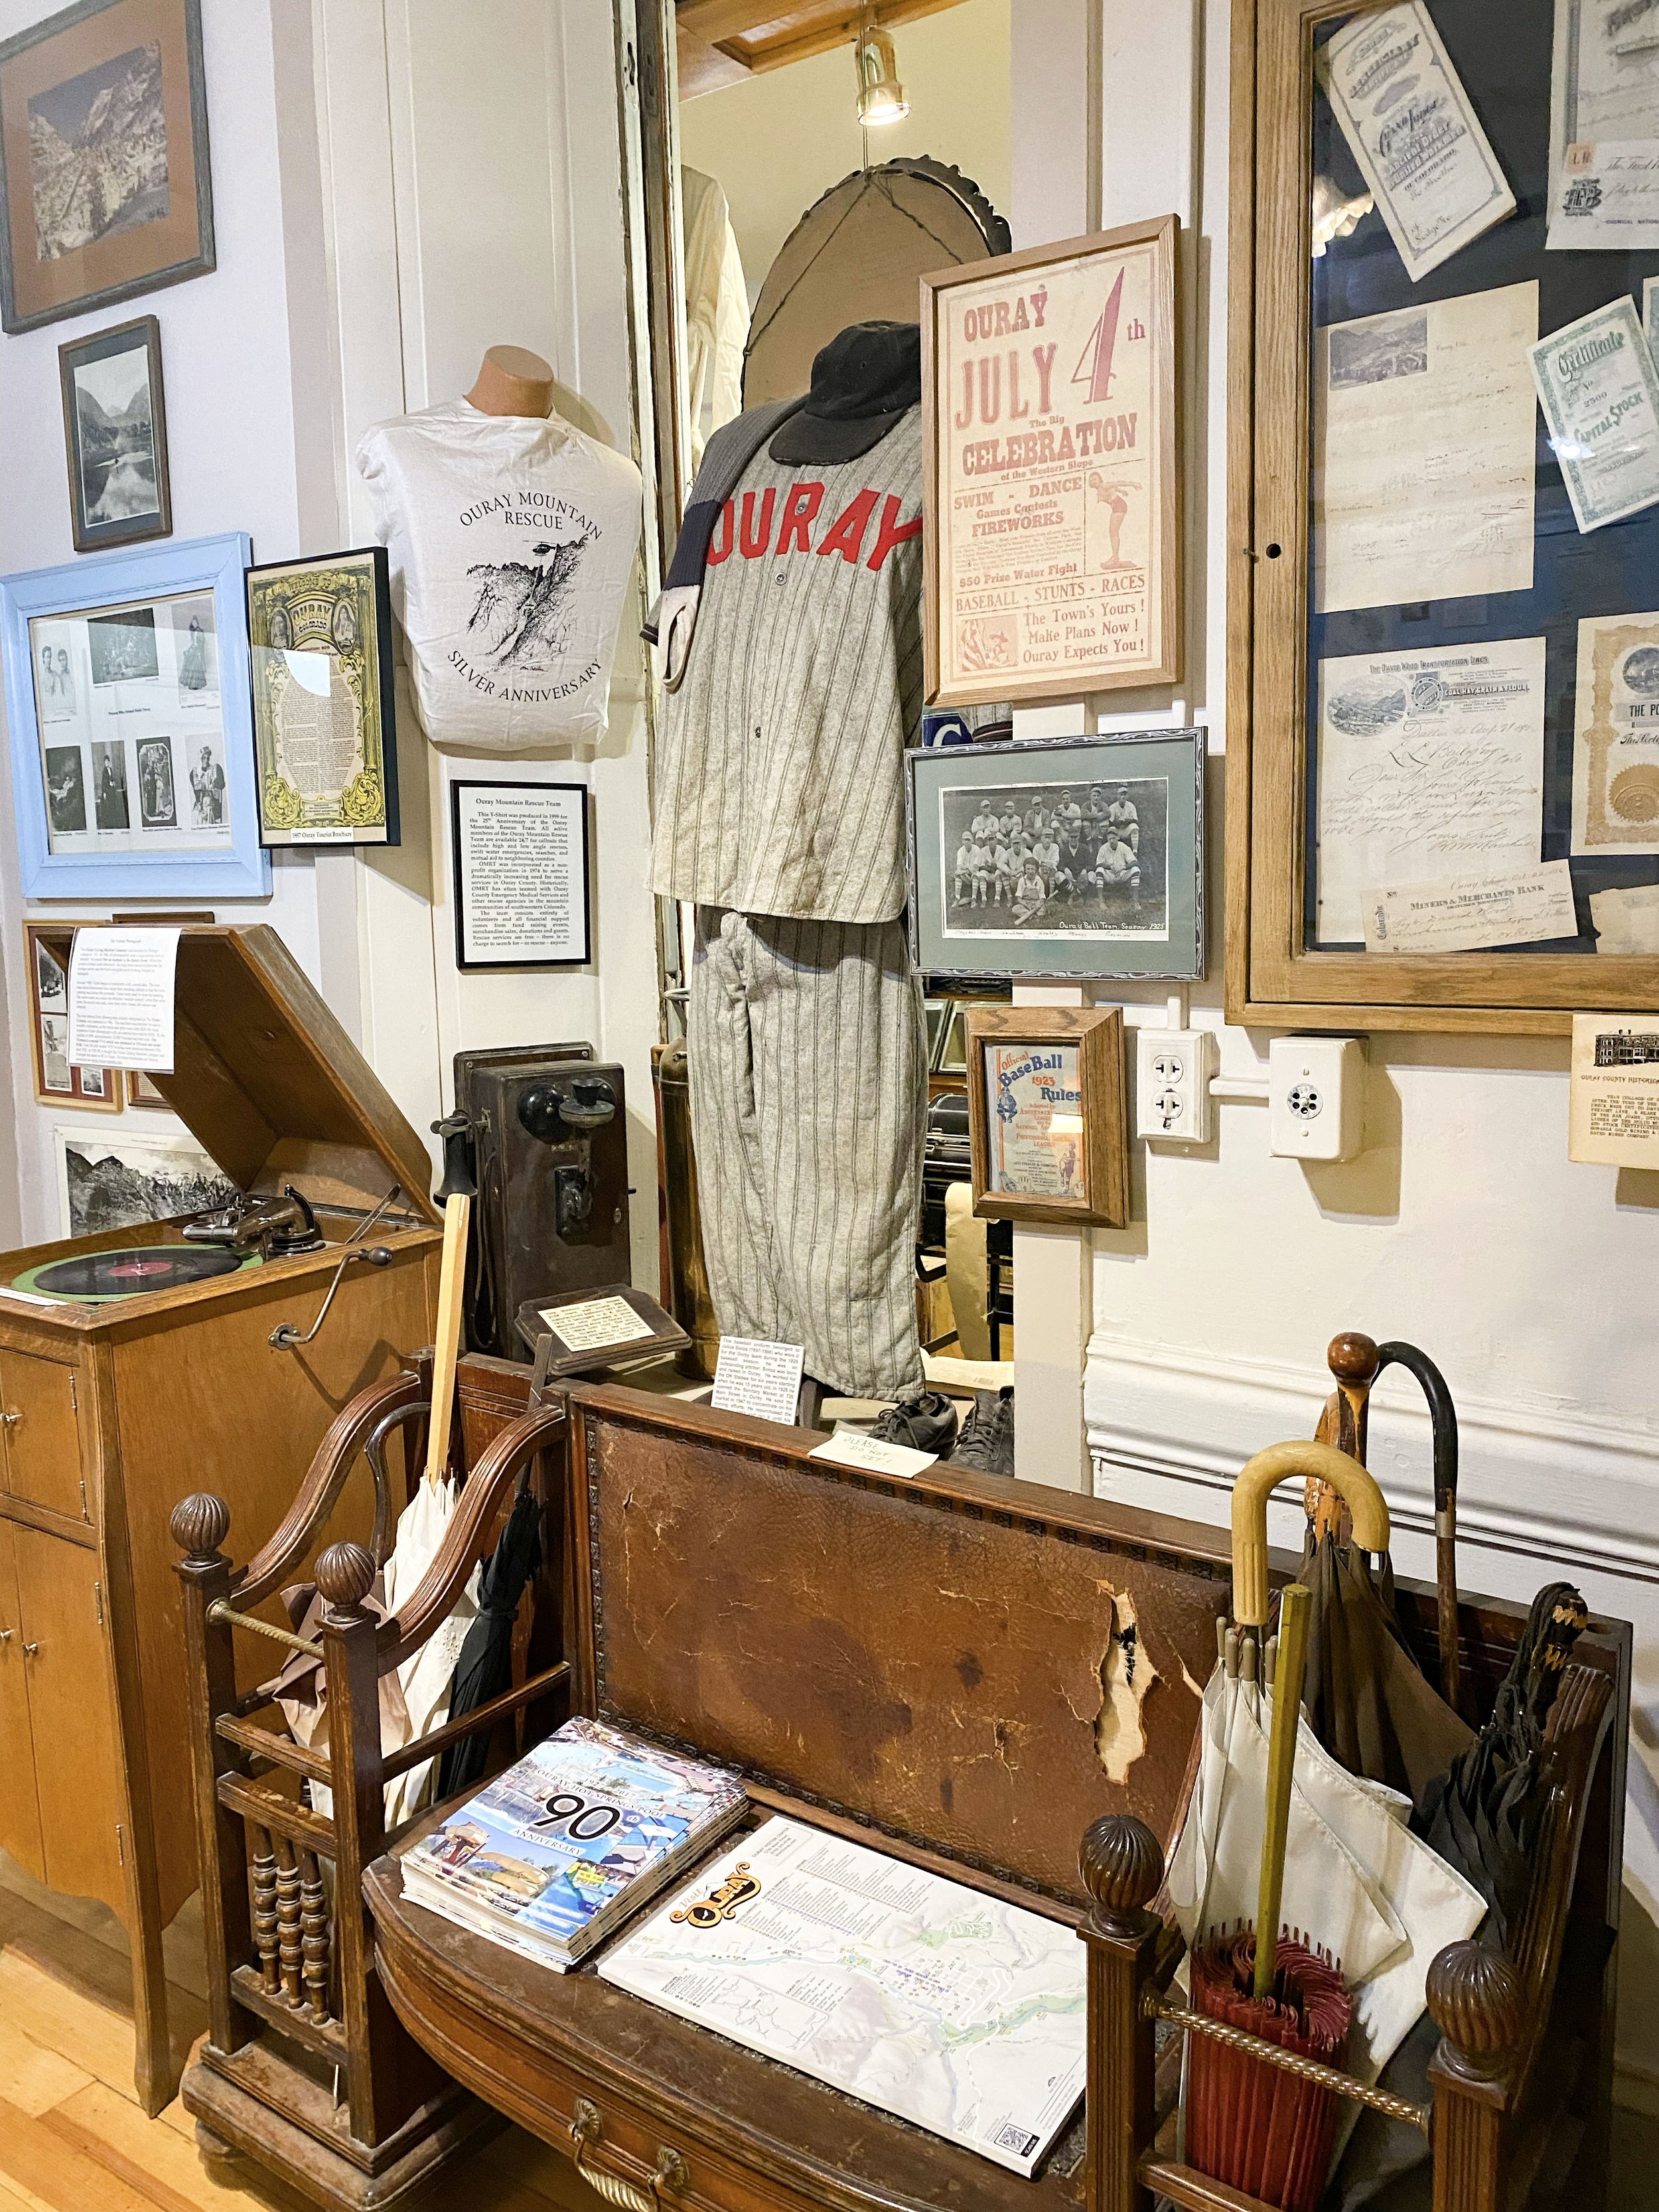 museum with ouray baseball outfit